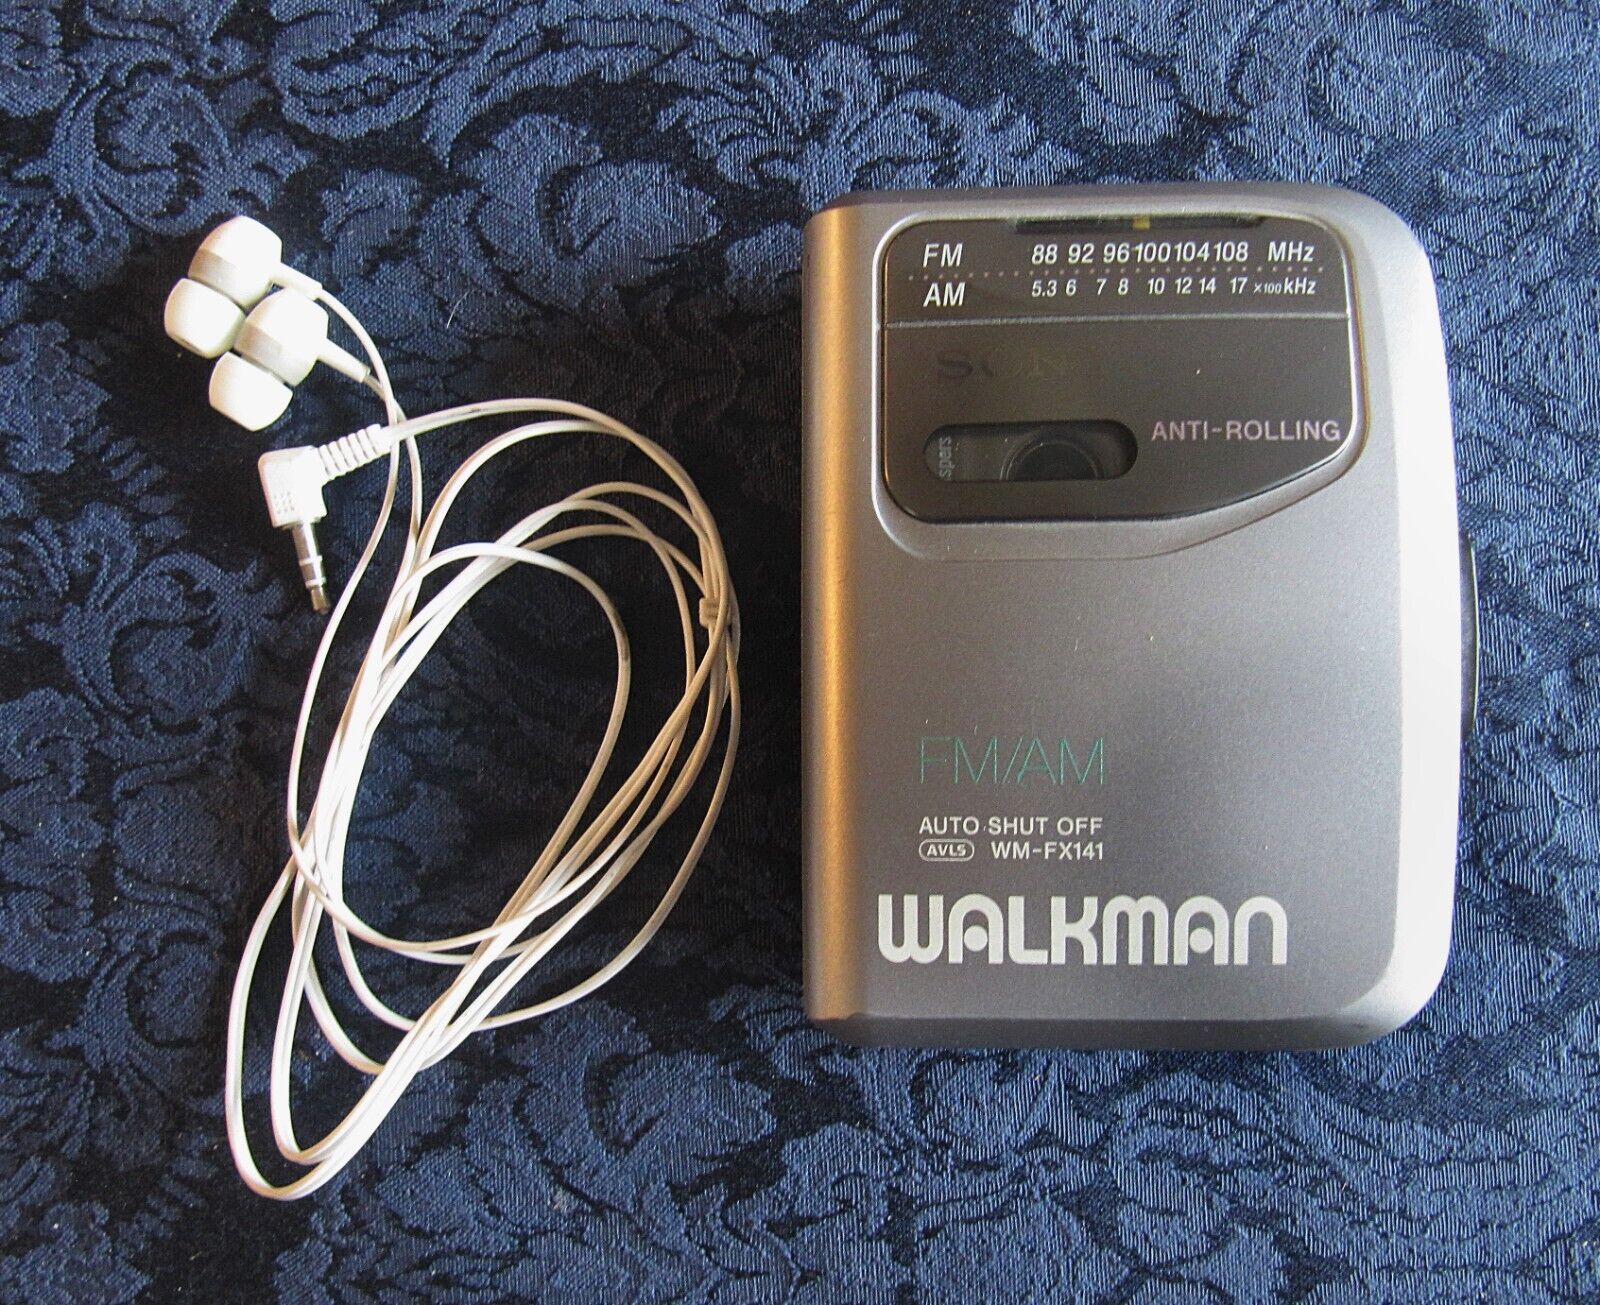 VINTAGE- SONY Walkman STEREO Cassette PLAYER AM/FM Radio, Works, Ready to Play